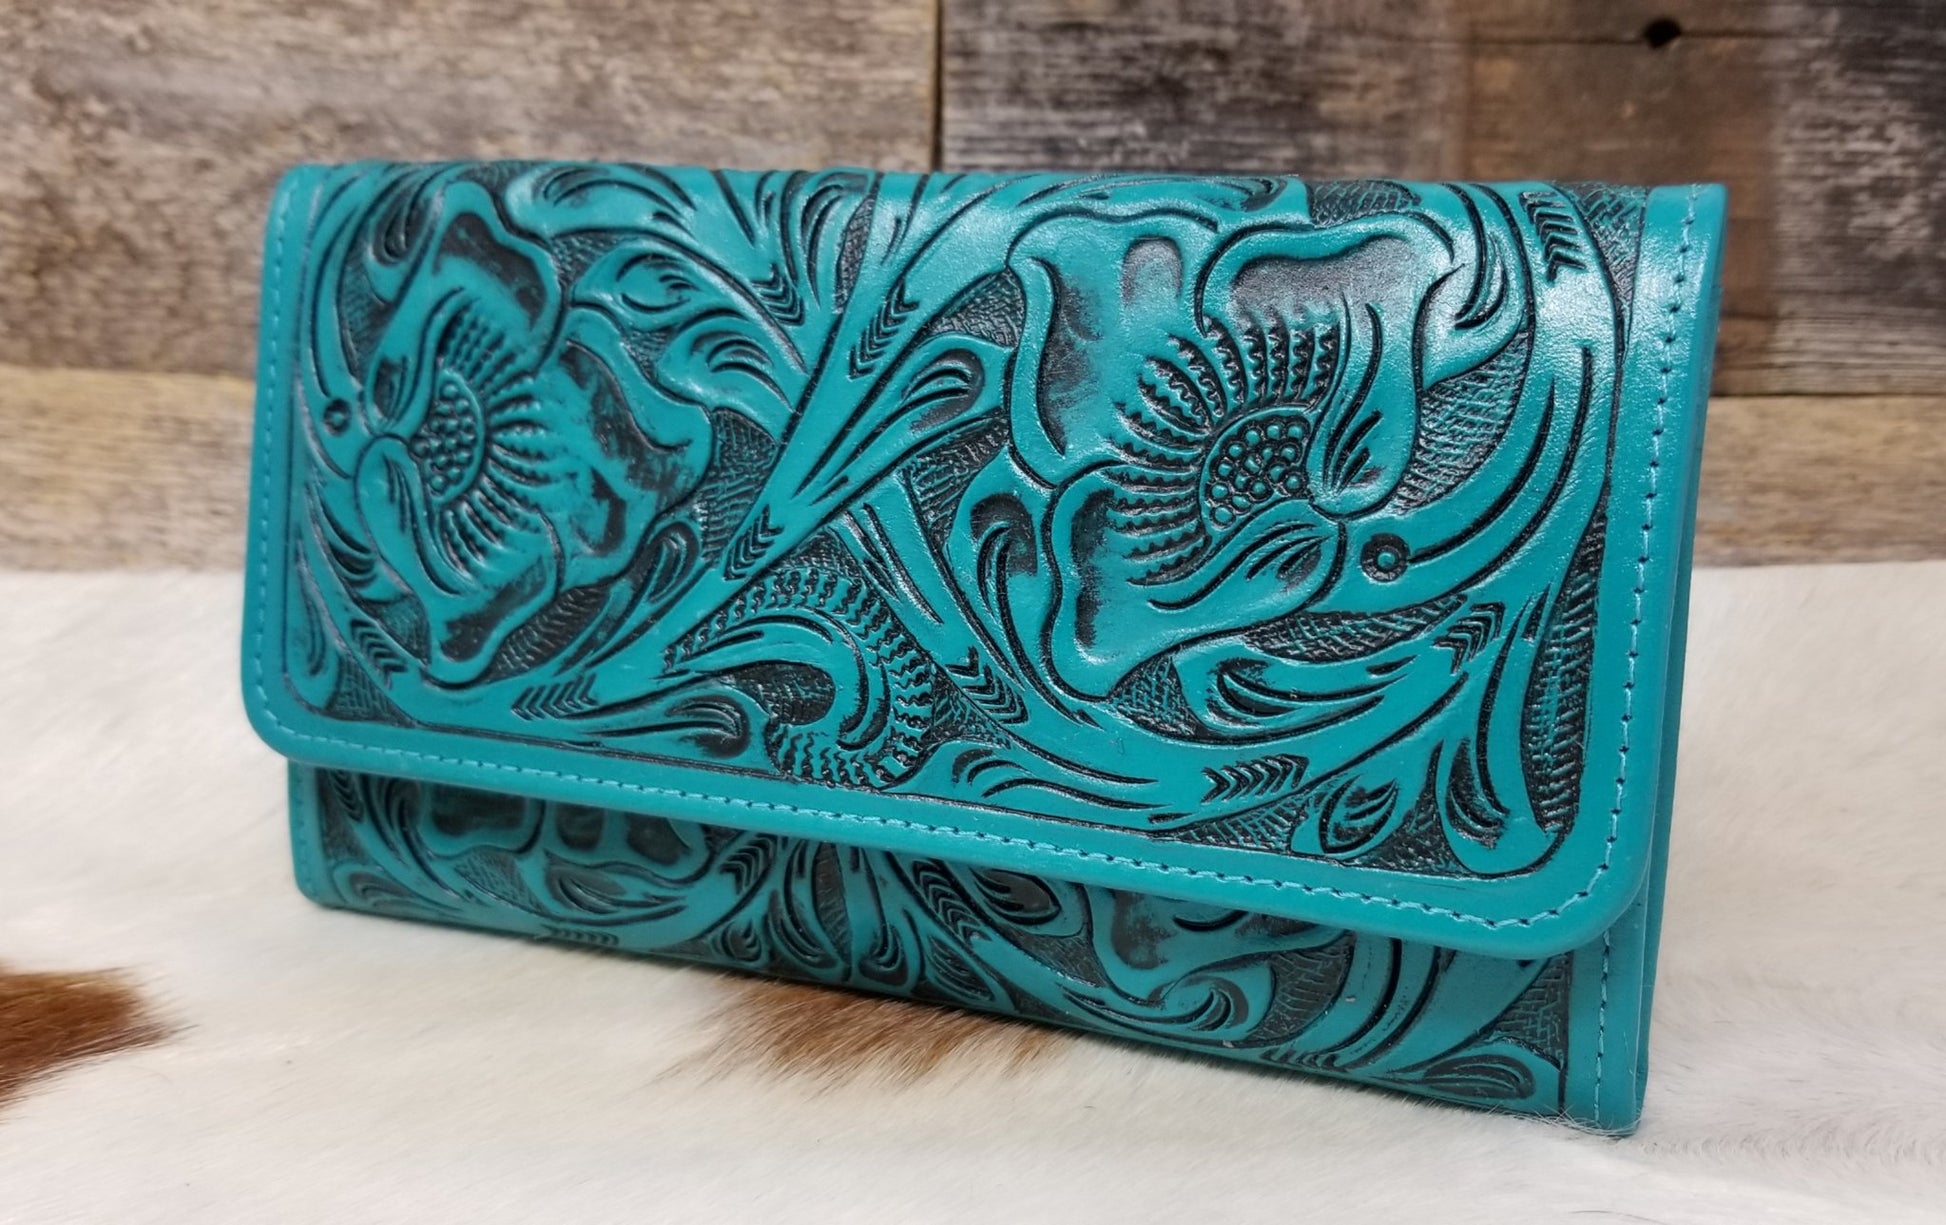 Trifold Floral Tooled Leather Wallet - clutch, cowgirl, gift, leather, purse, southwestern, tooled, turquoise, wallet, western -  - Baha Ranch Western Wear